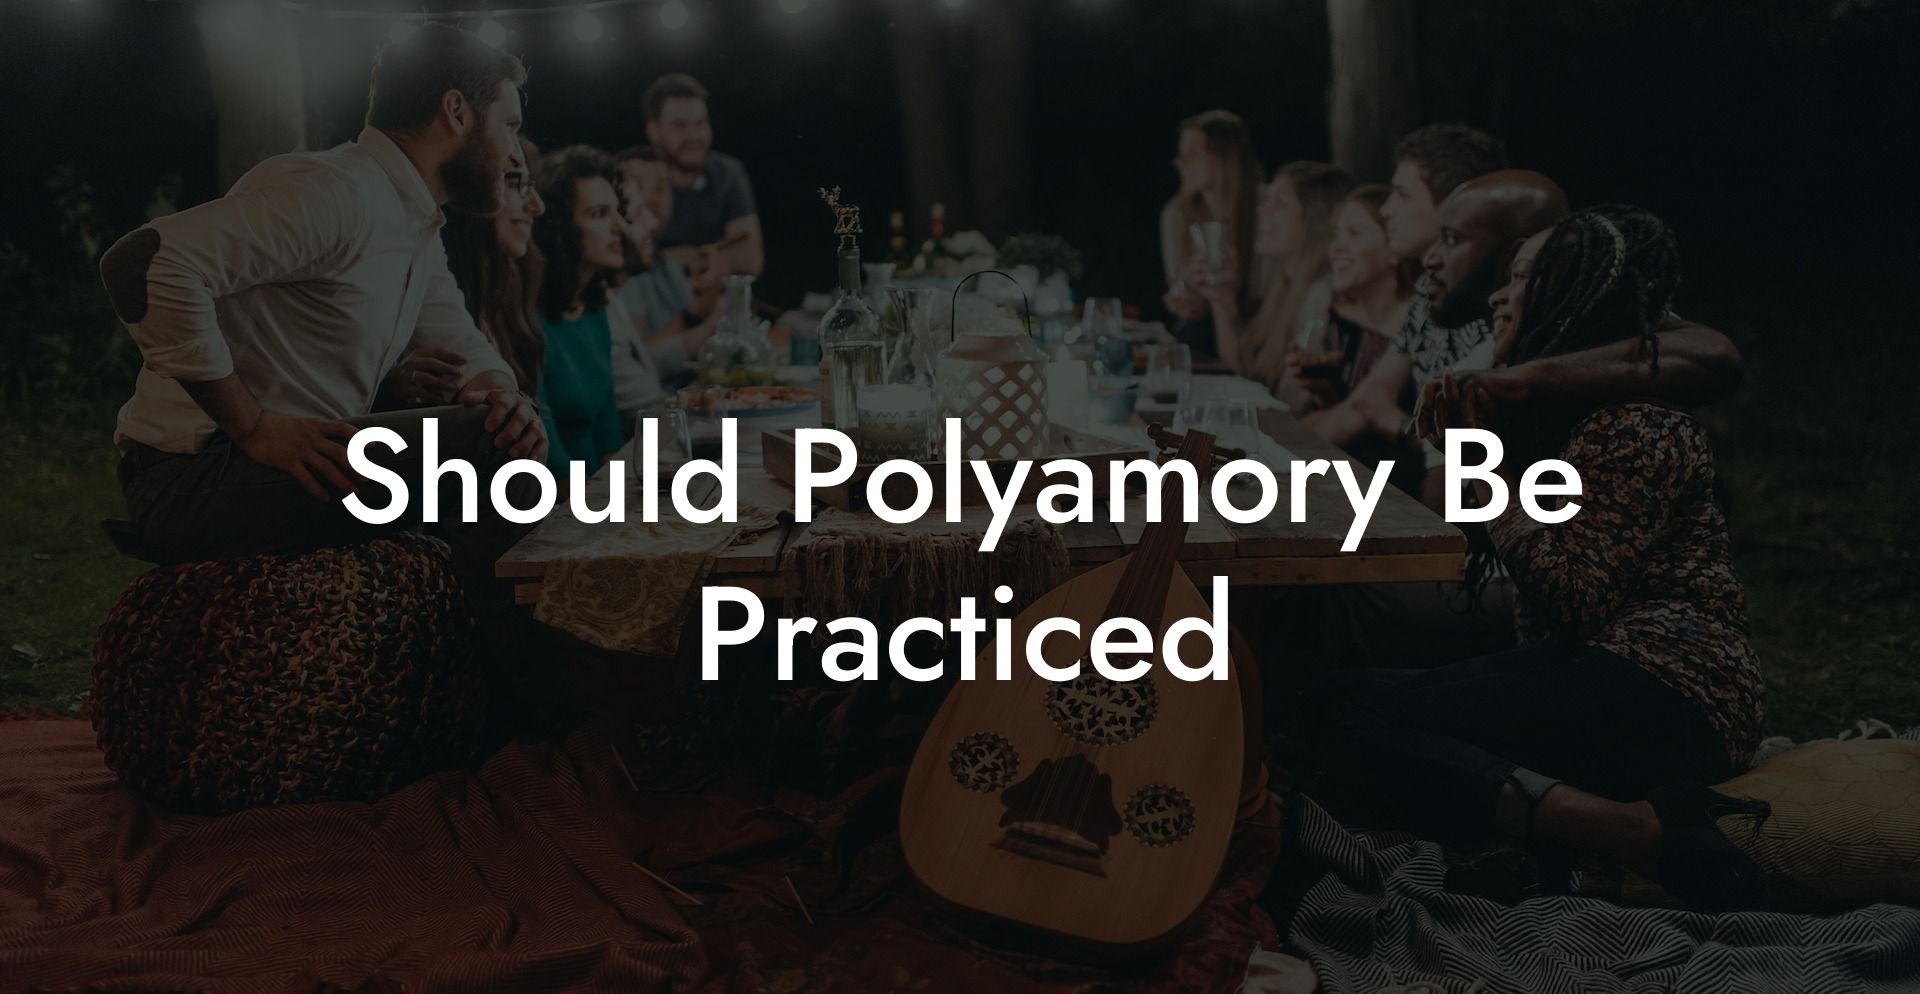 Should Polyamory Be Practiced